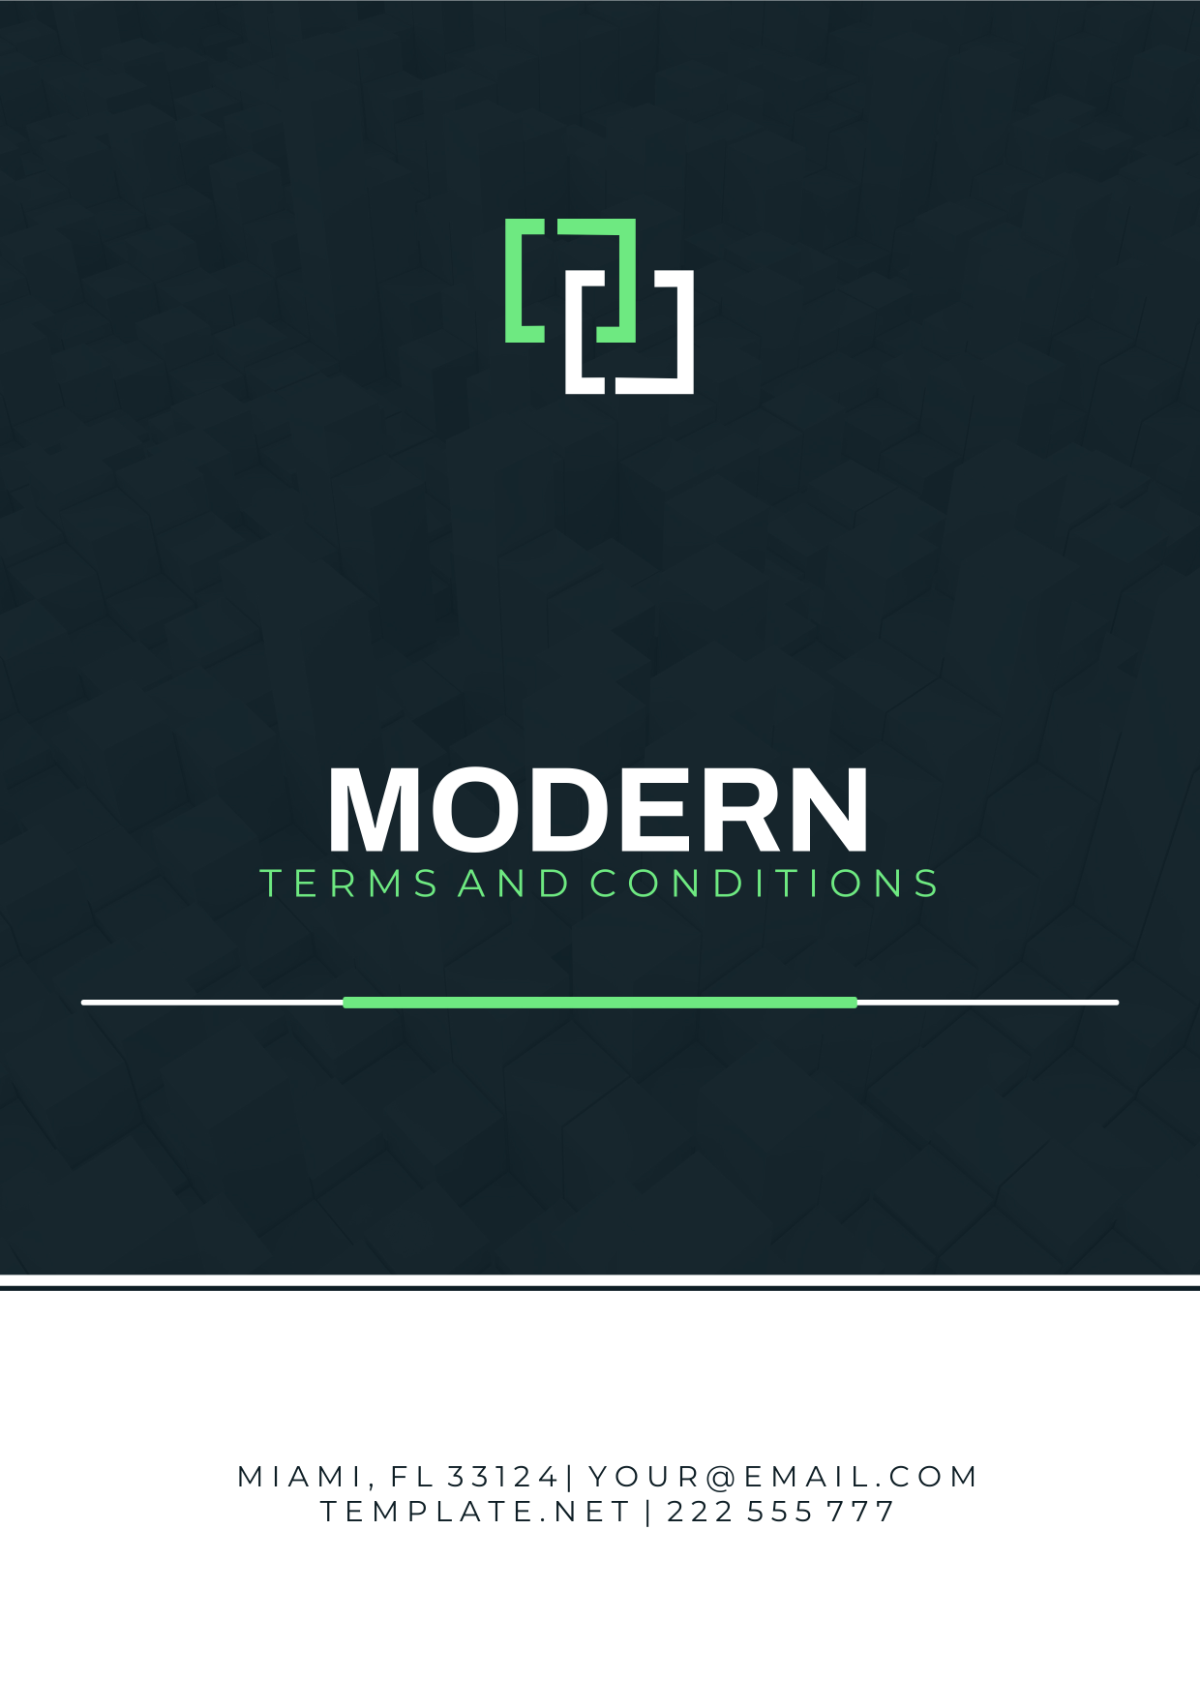 Modern Terms and Conditions Cover Page